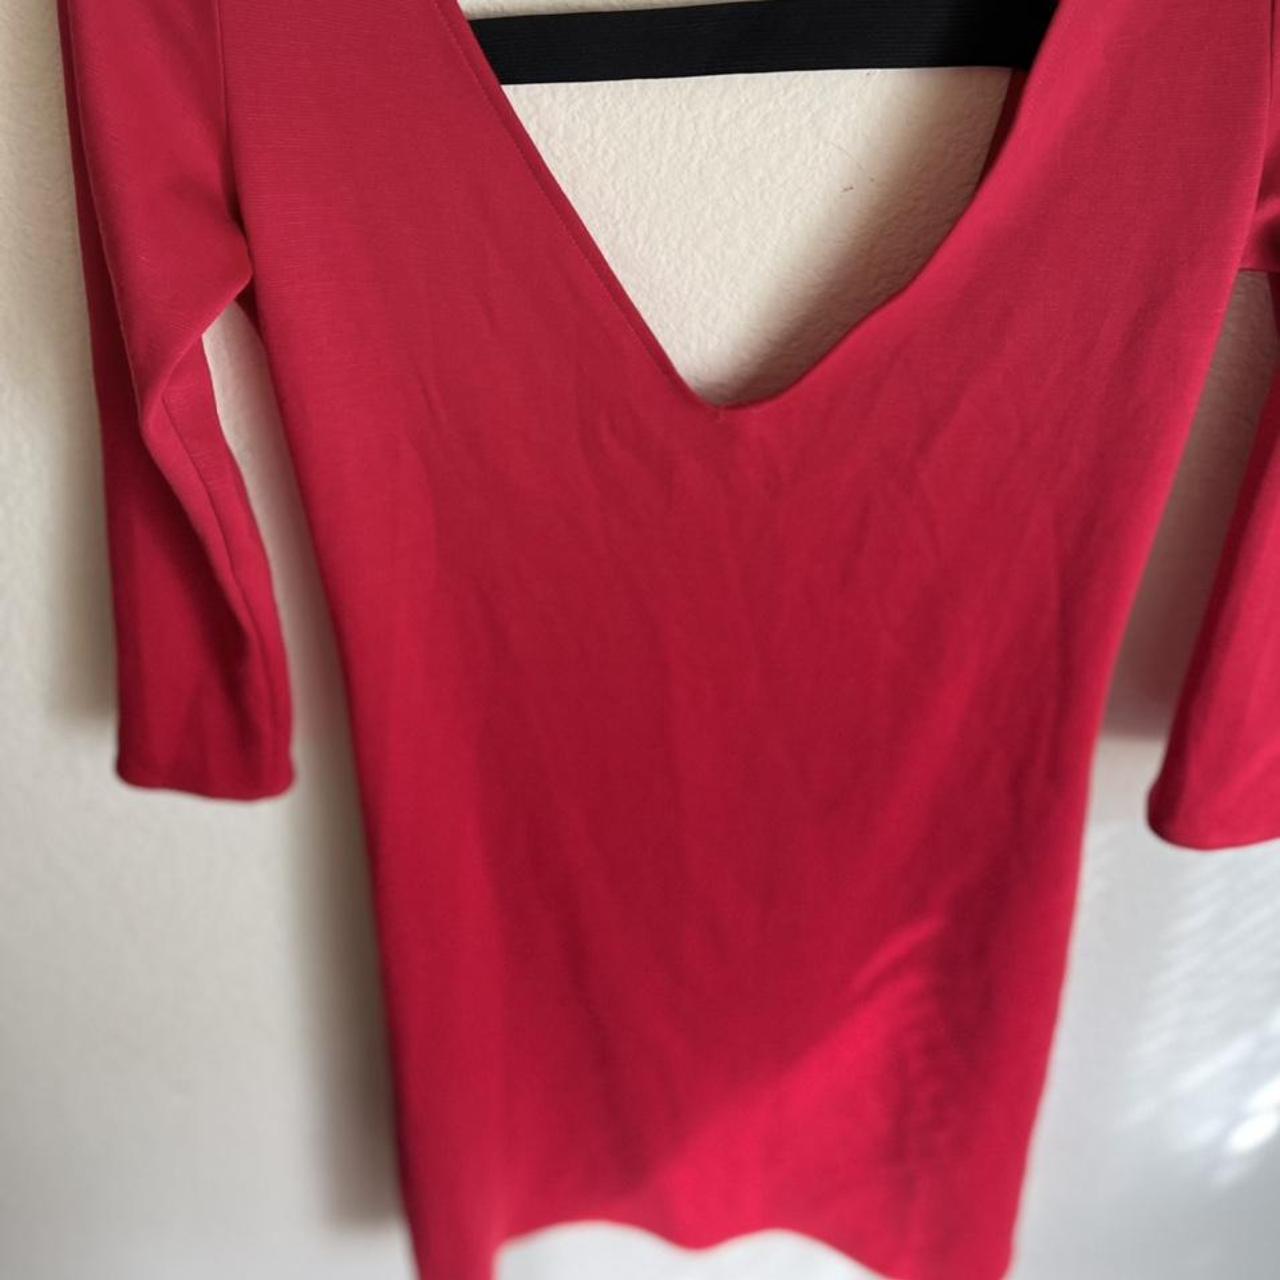 Product Image 3 - Sexy red dress,
U can wear